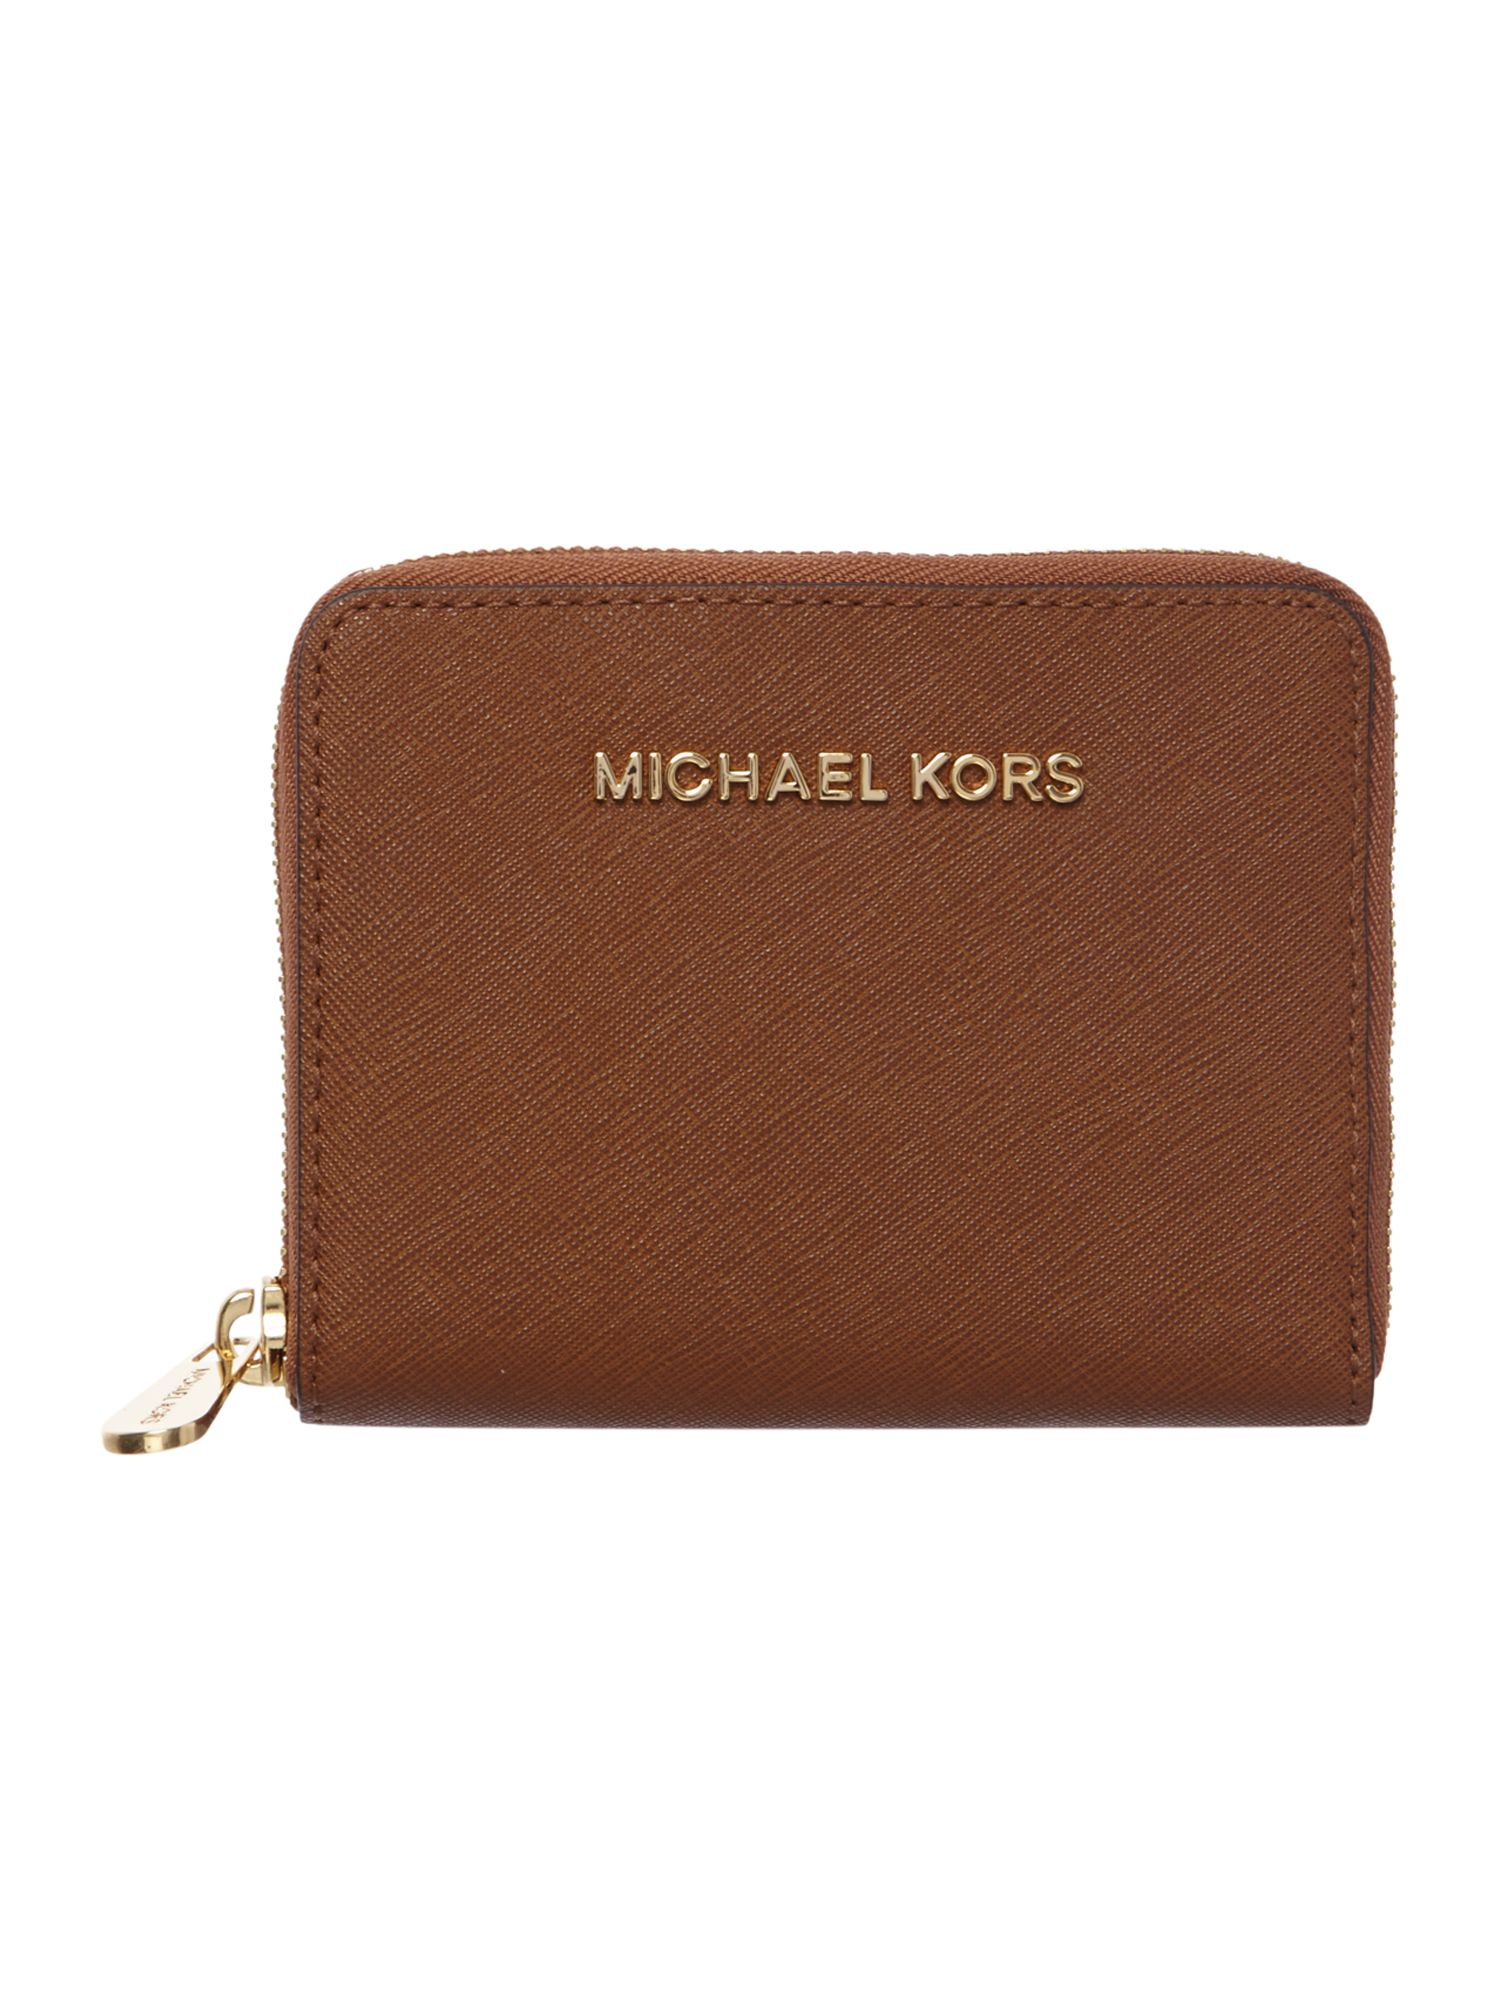 Michael kors Jet Set Tan Saffiano Leather Wallet in Brown | Lyst